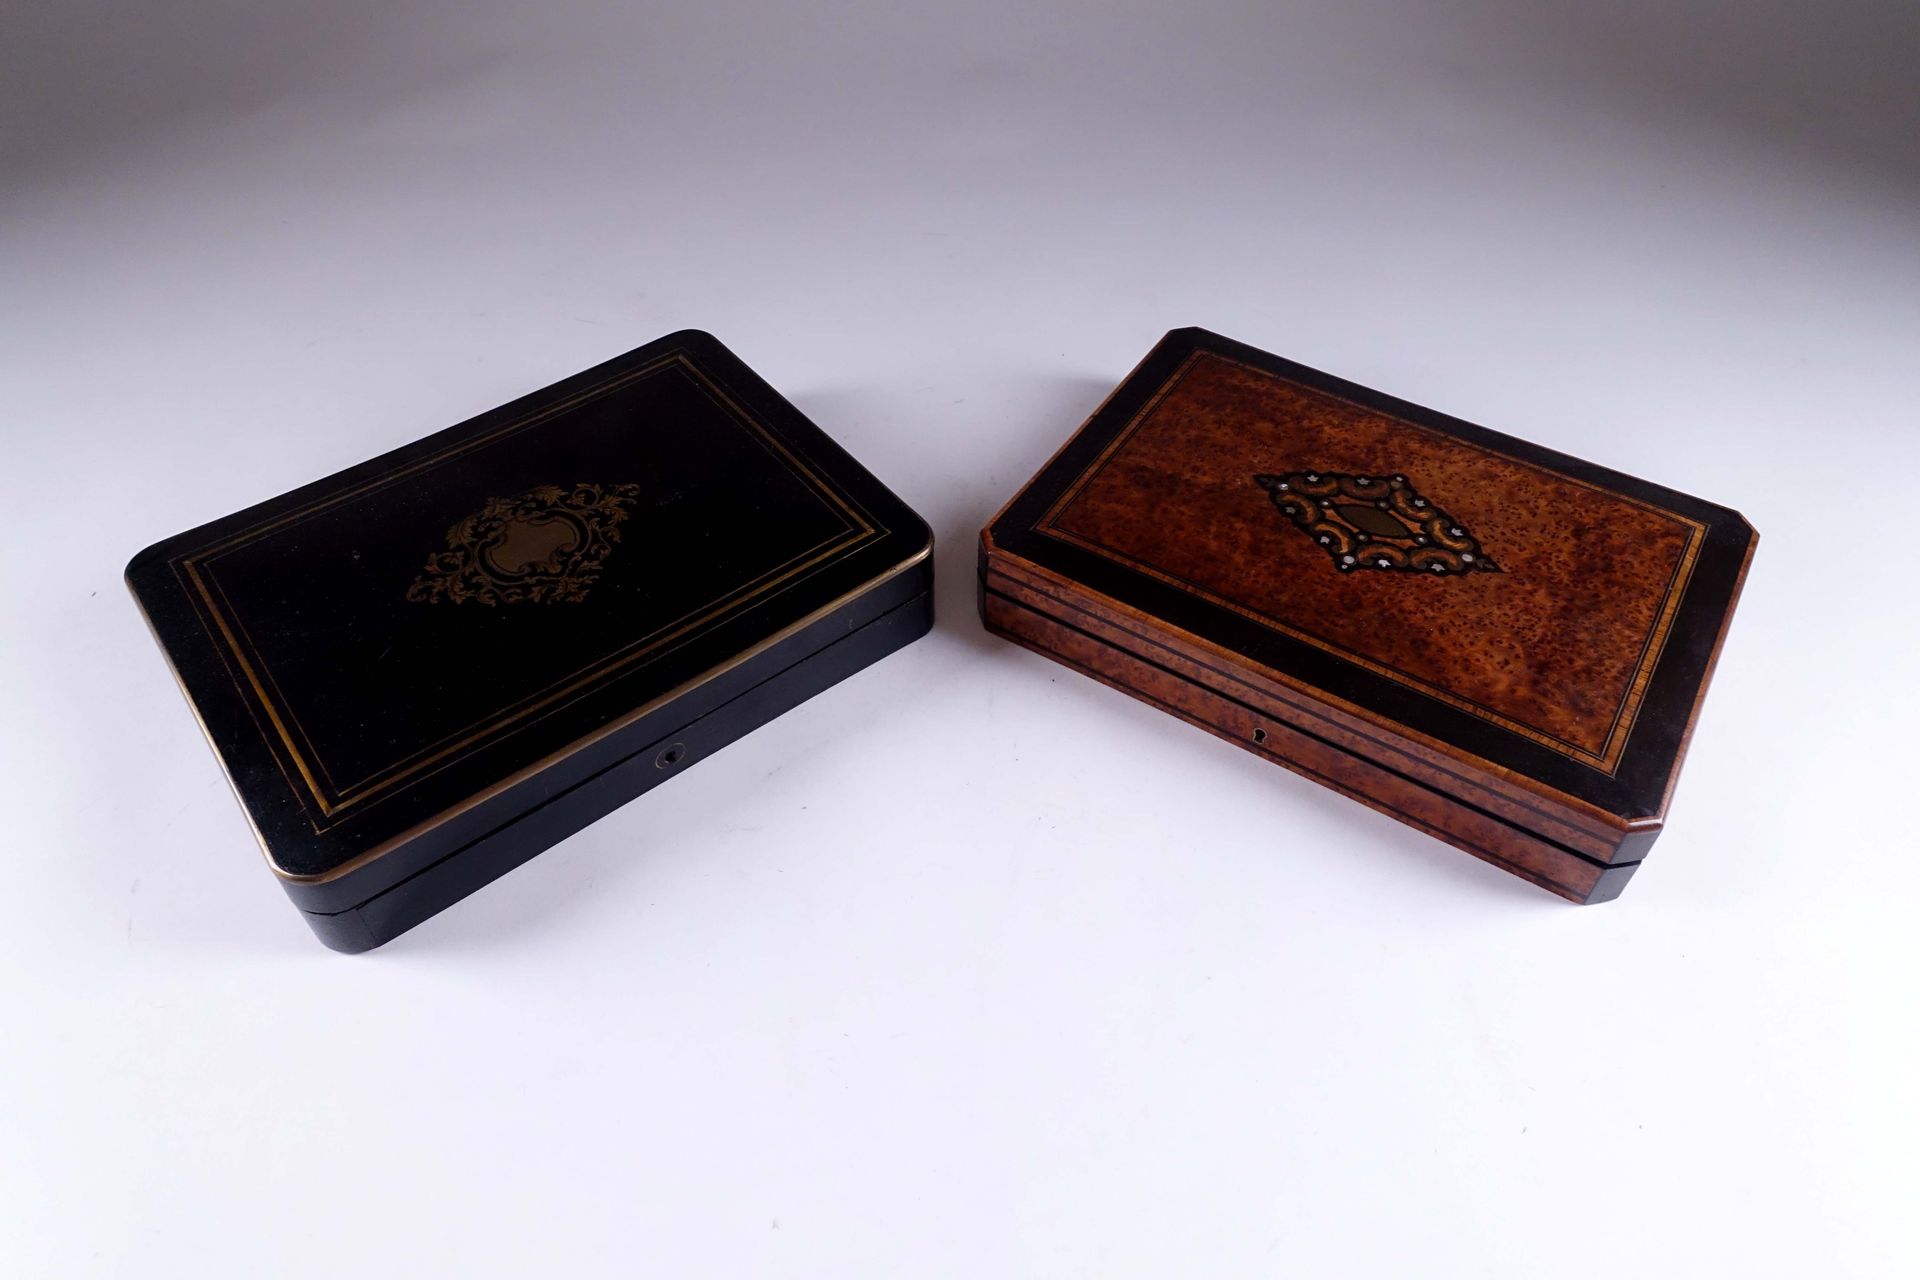 Deux boîtes à jetons. Black polished wood, and precious wood inlaid with brass a&hellip;